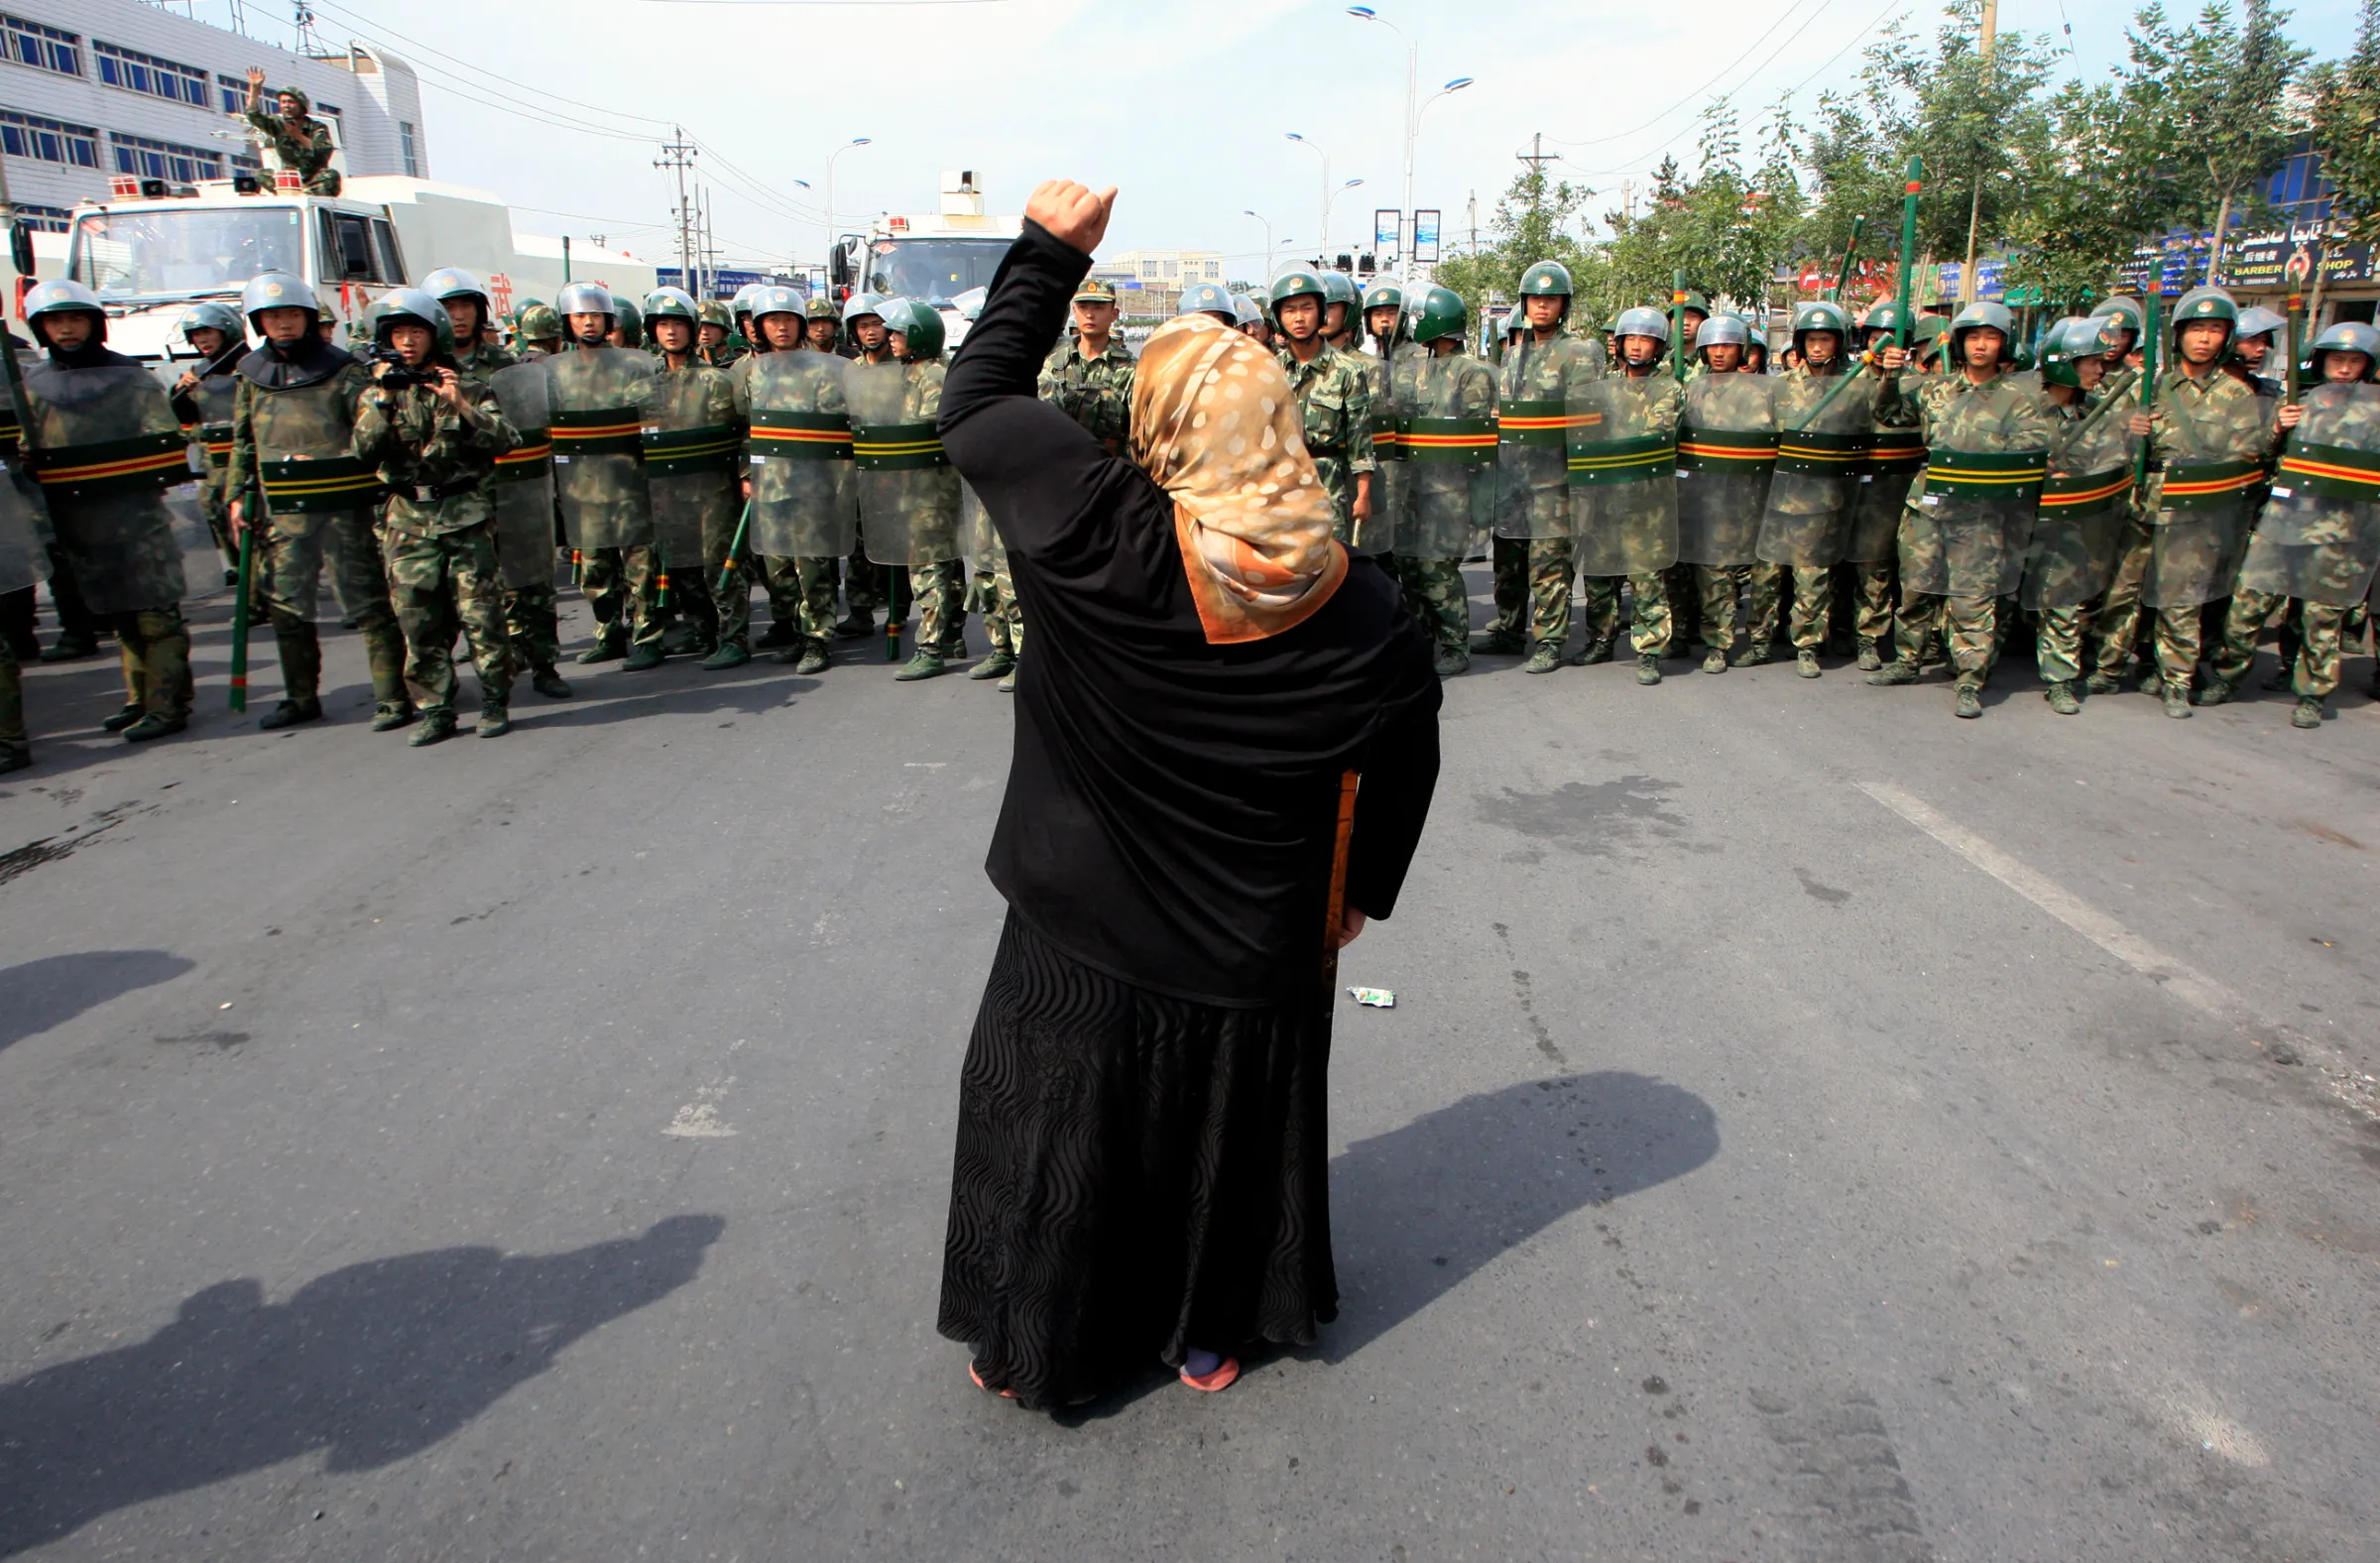 A local woman on a crutch shouts at Chinese paramilitary police wearing riot gear as a crowd of angry locals confront security forces on a street in the city of Urumqi in China's Xinjiang Autonomous Region